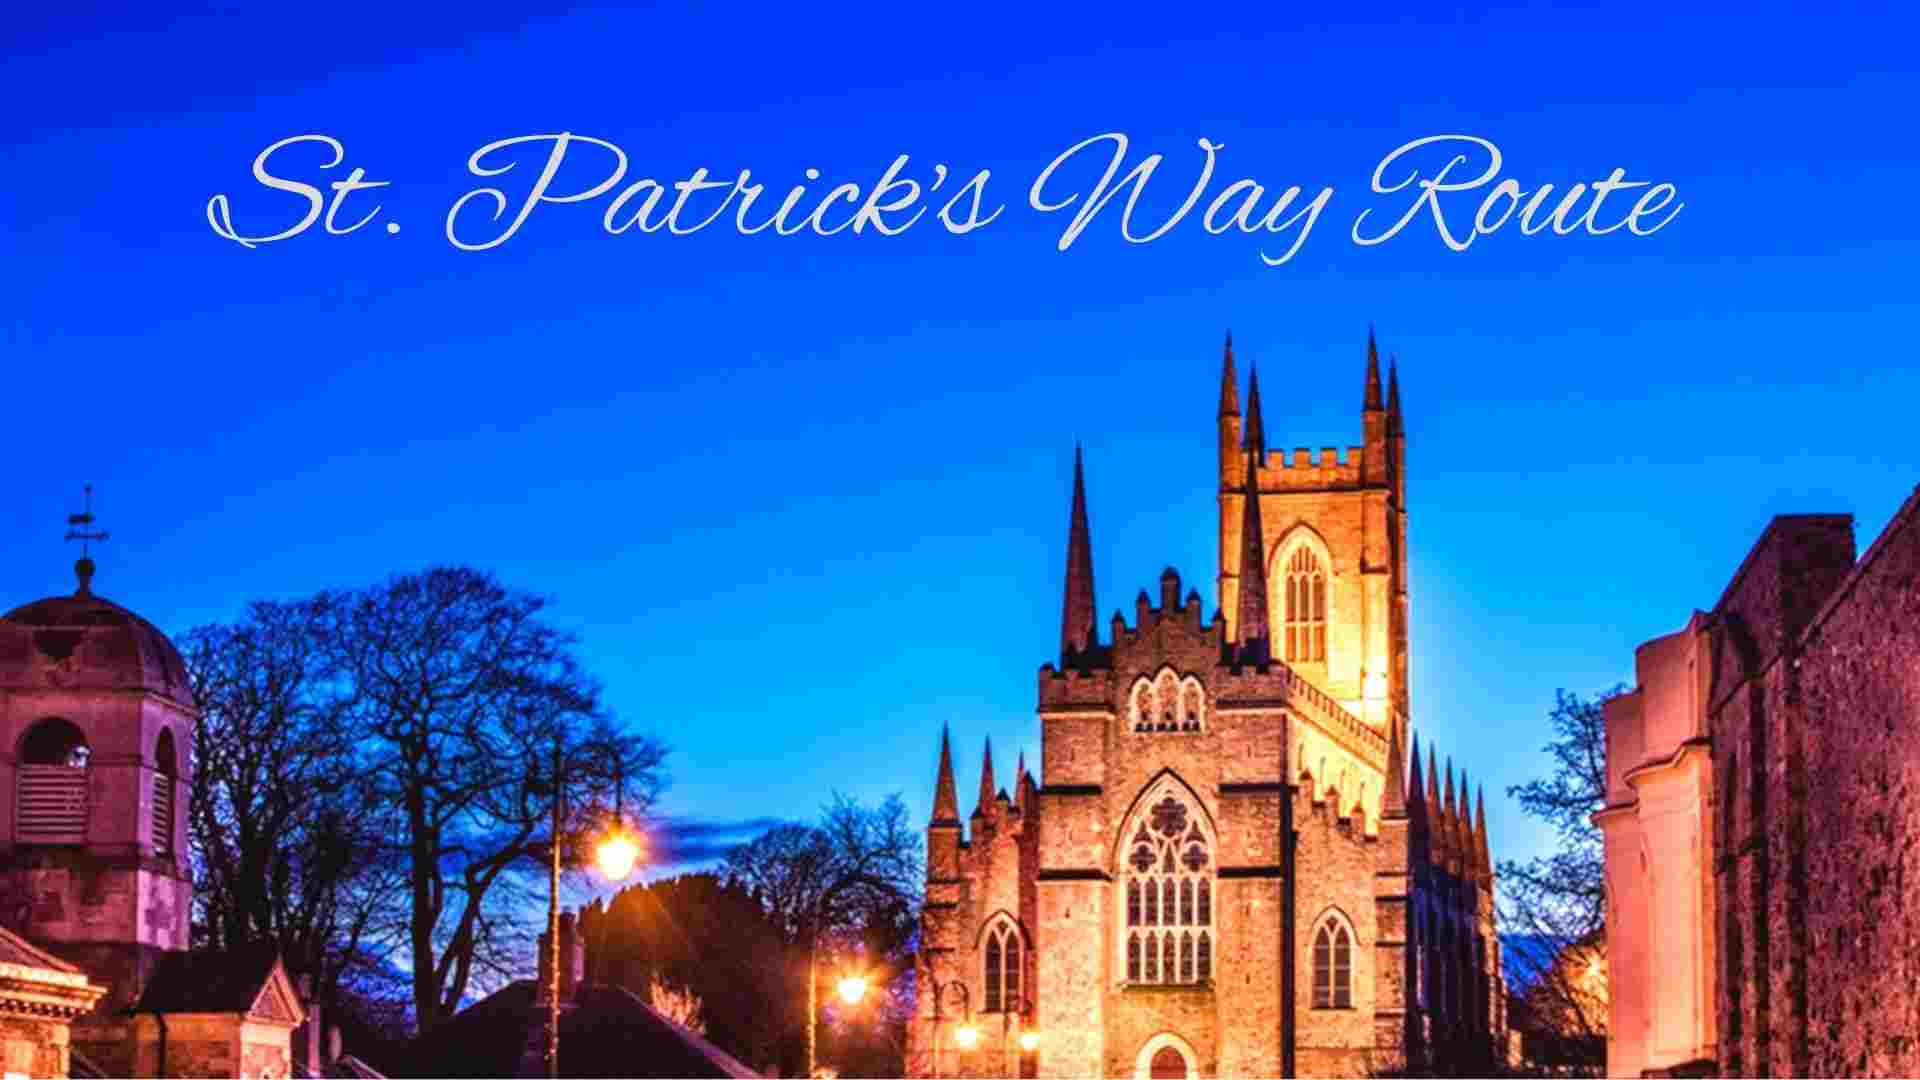 St. Patrick's Way Route Map wallpaper and image